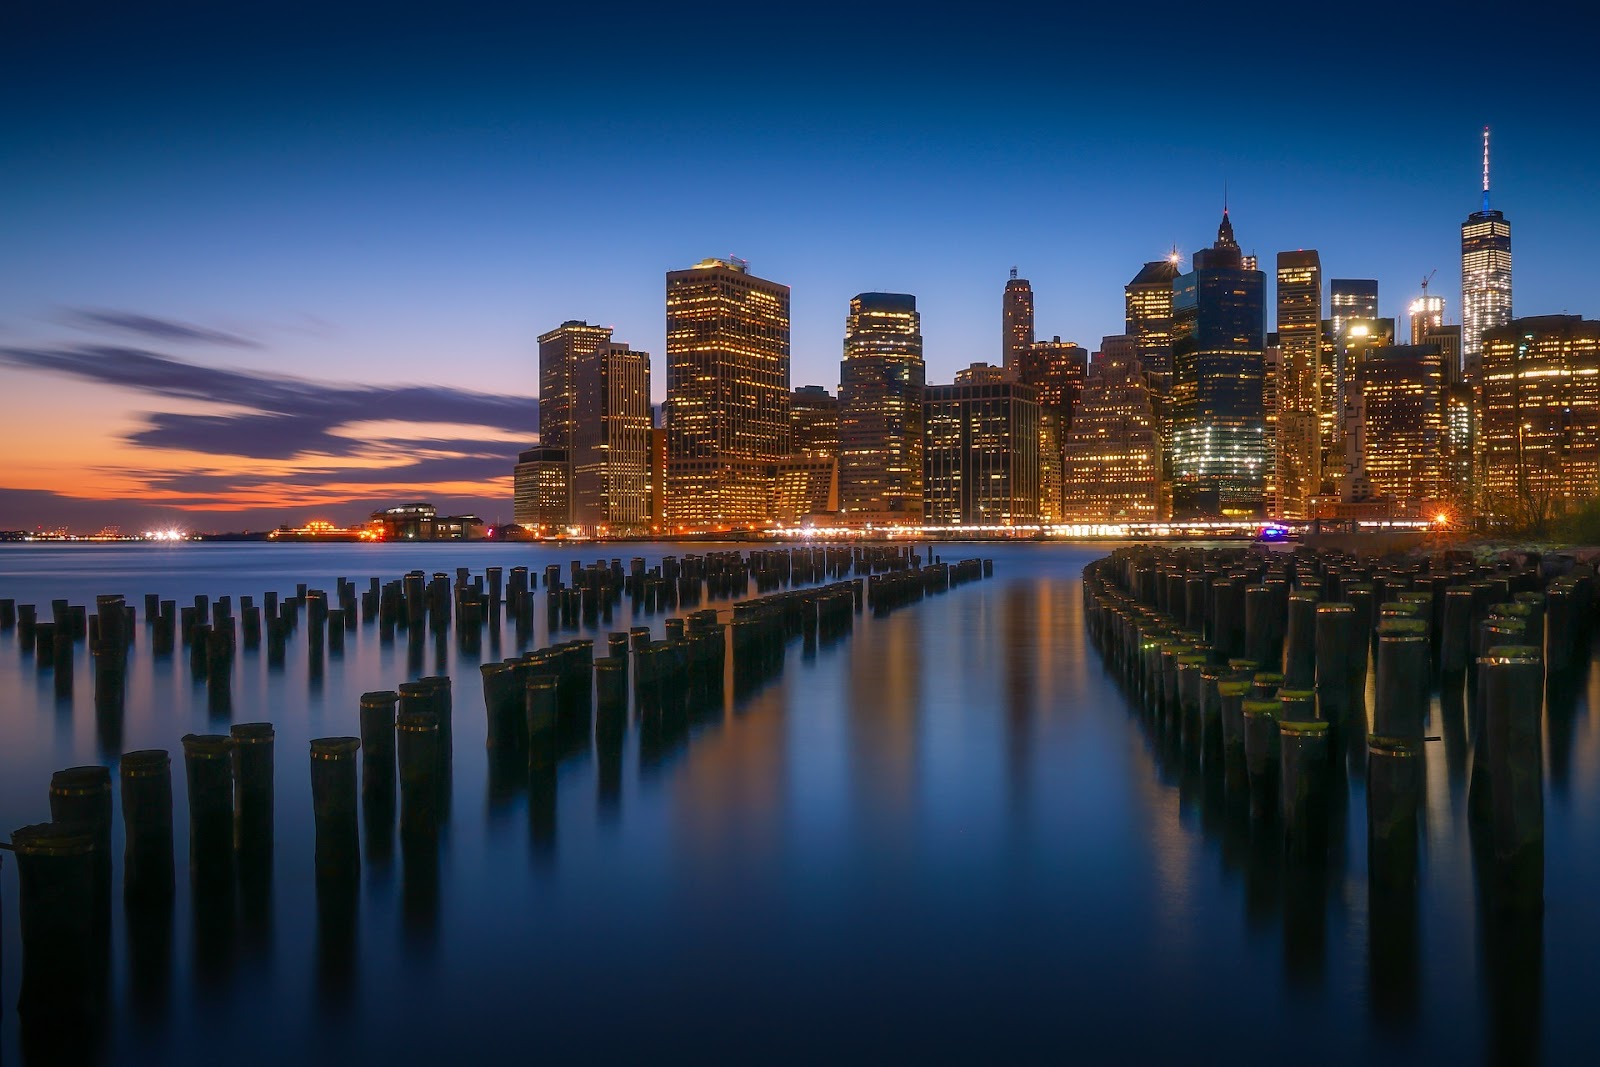 Cities like New York are being mandated to reduce emissions. Image used courtesy of Pixabay